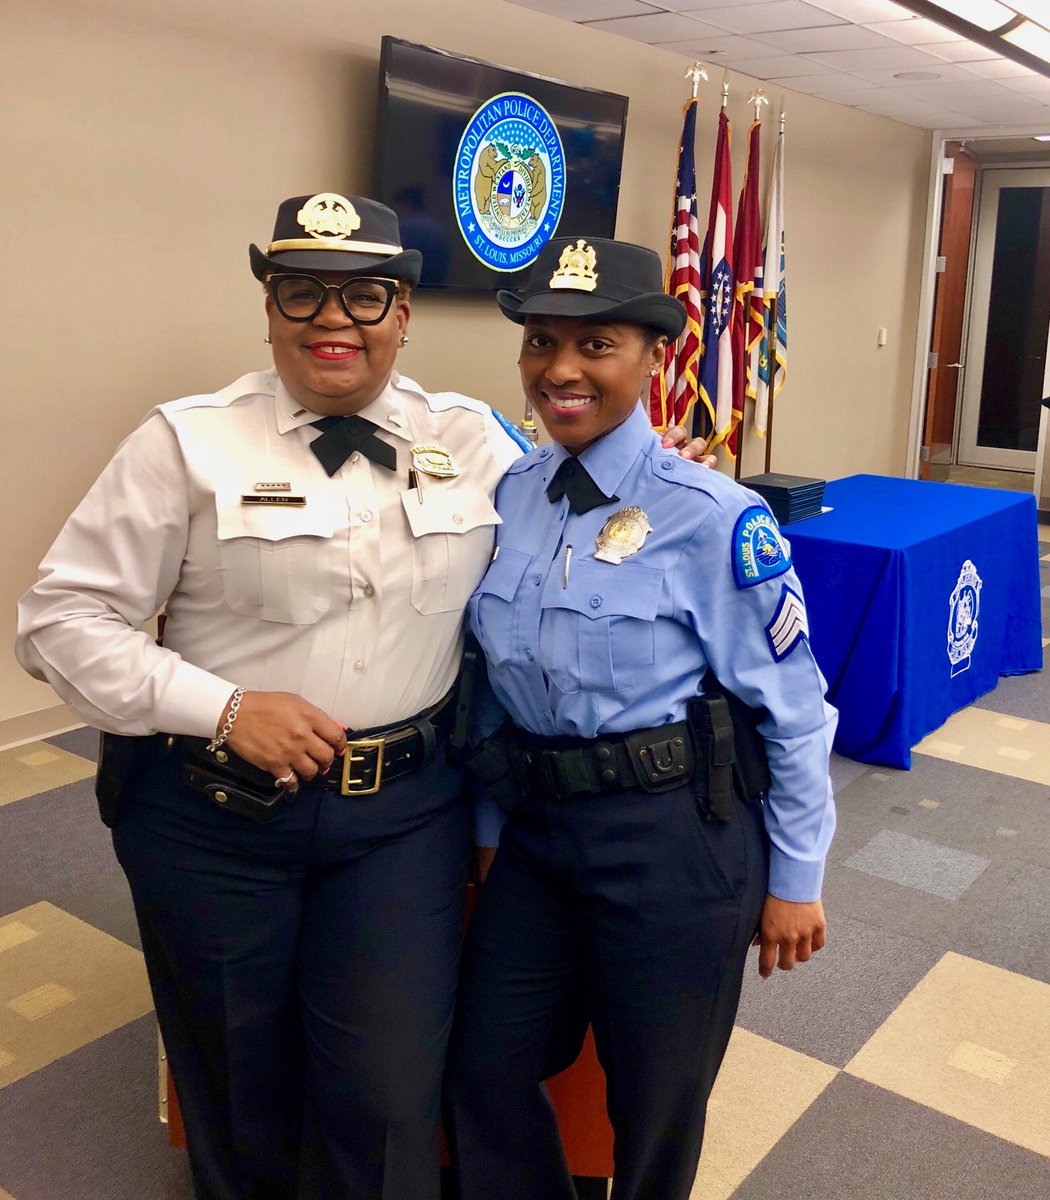 Lt. Allen & Sgt. Allen...we are not blood related but we are indeed blue sisters in service. 💙 #SmilingWhileServing #BlueSisters #CommunityEngagement #Recruitment #WaveCapsComingThru #TheAllenGirls